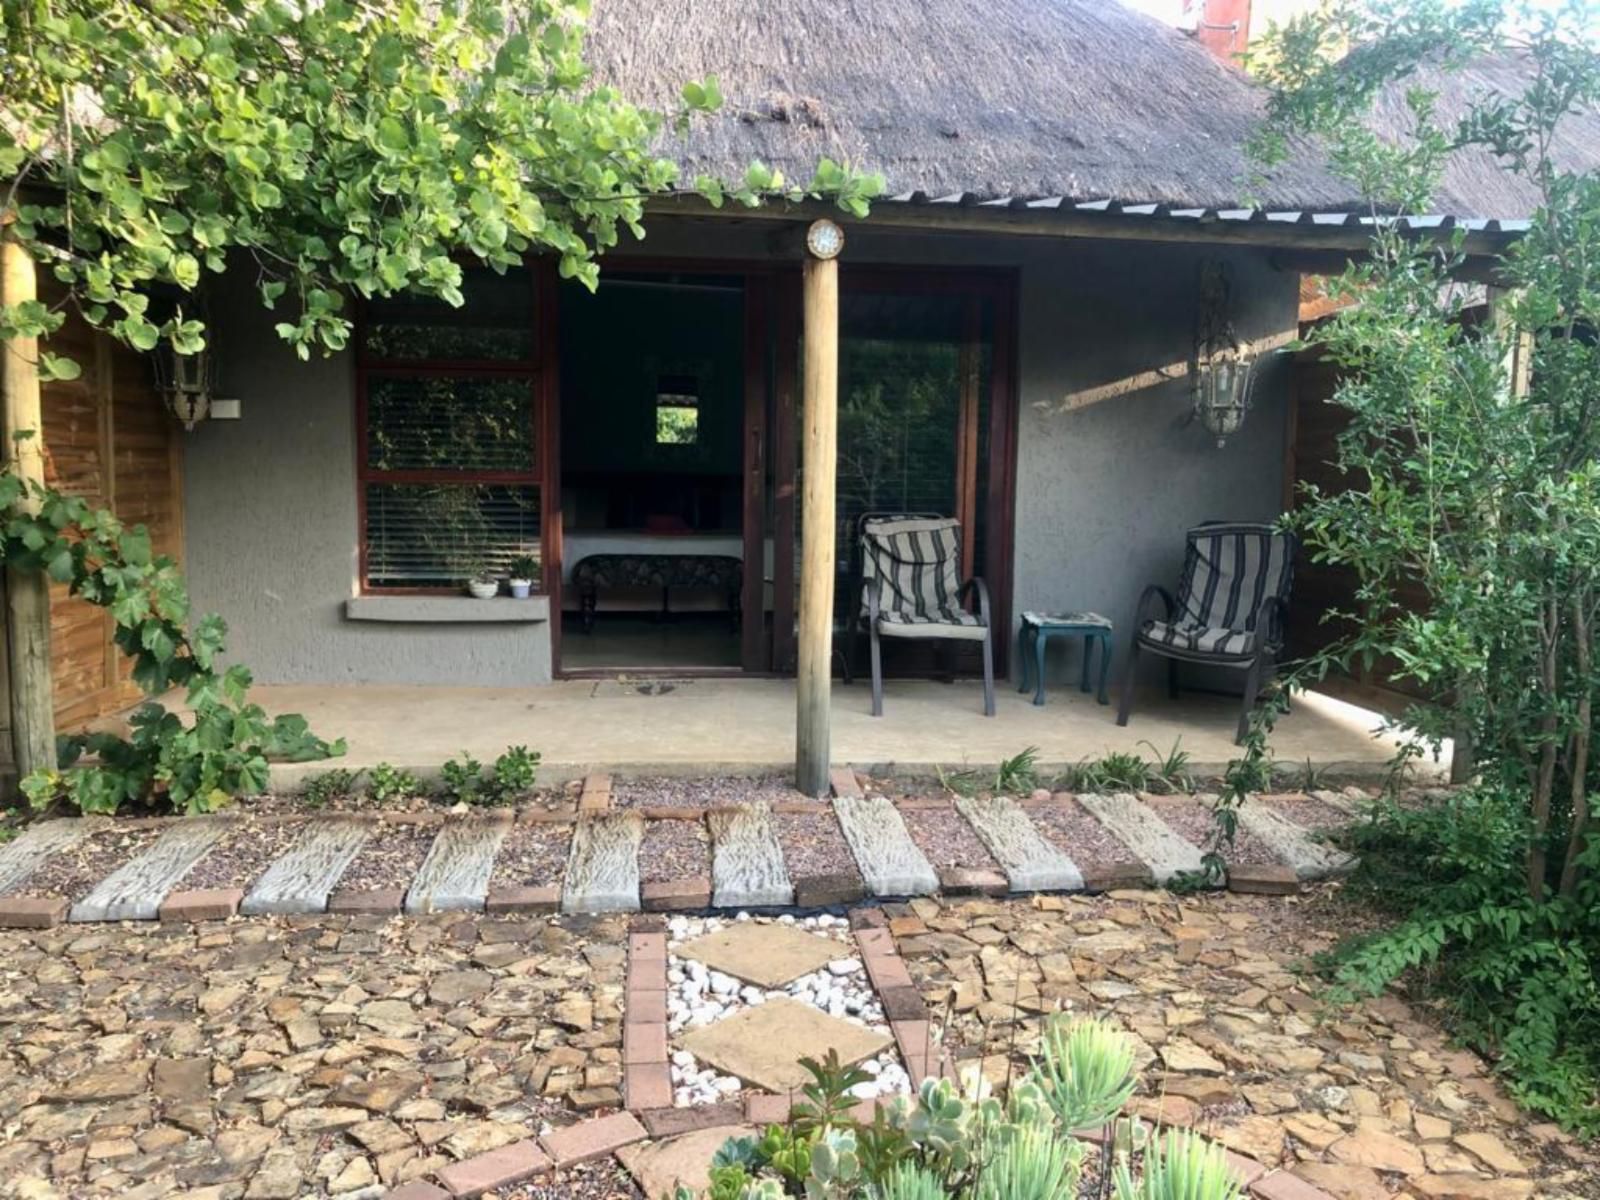 Waterberg Accommodation In Koro Creek Golf Estate Modimolle Nylstroom Limpopo Province South Africa House, Building, Architecture